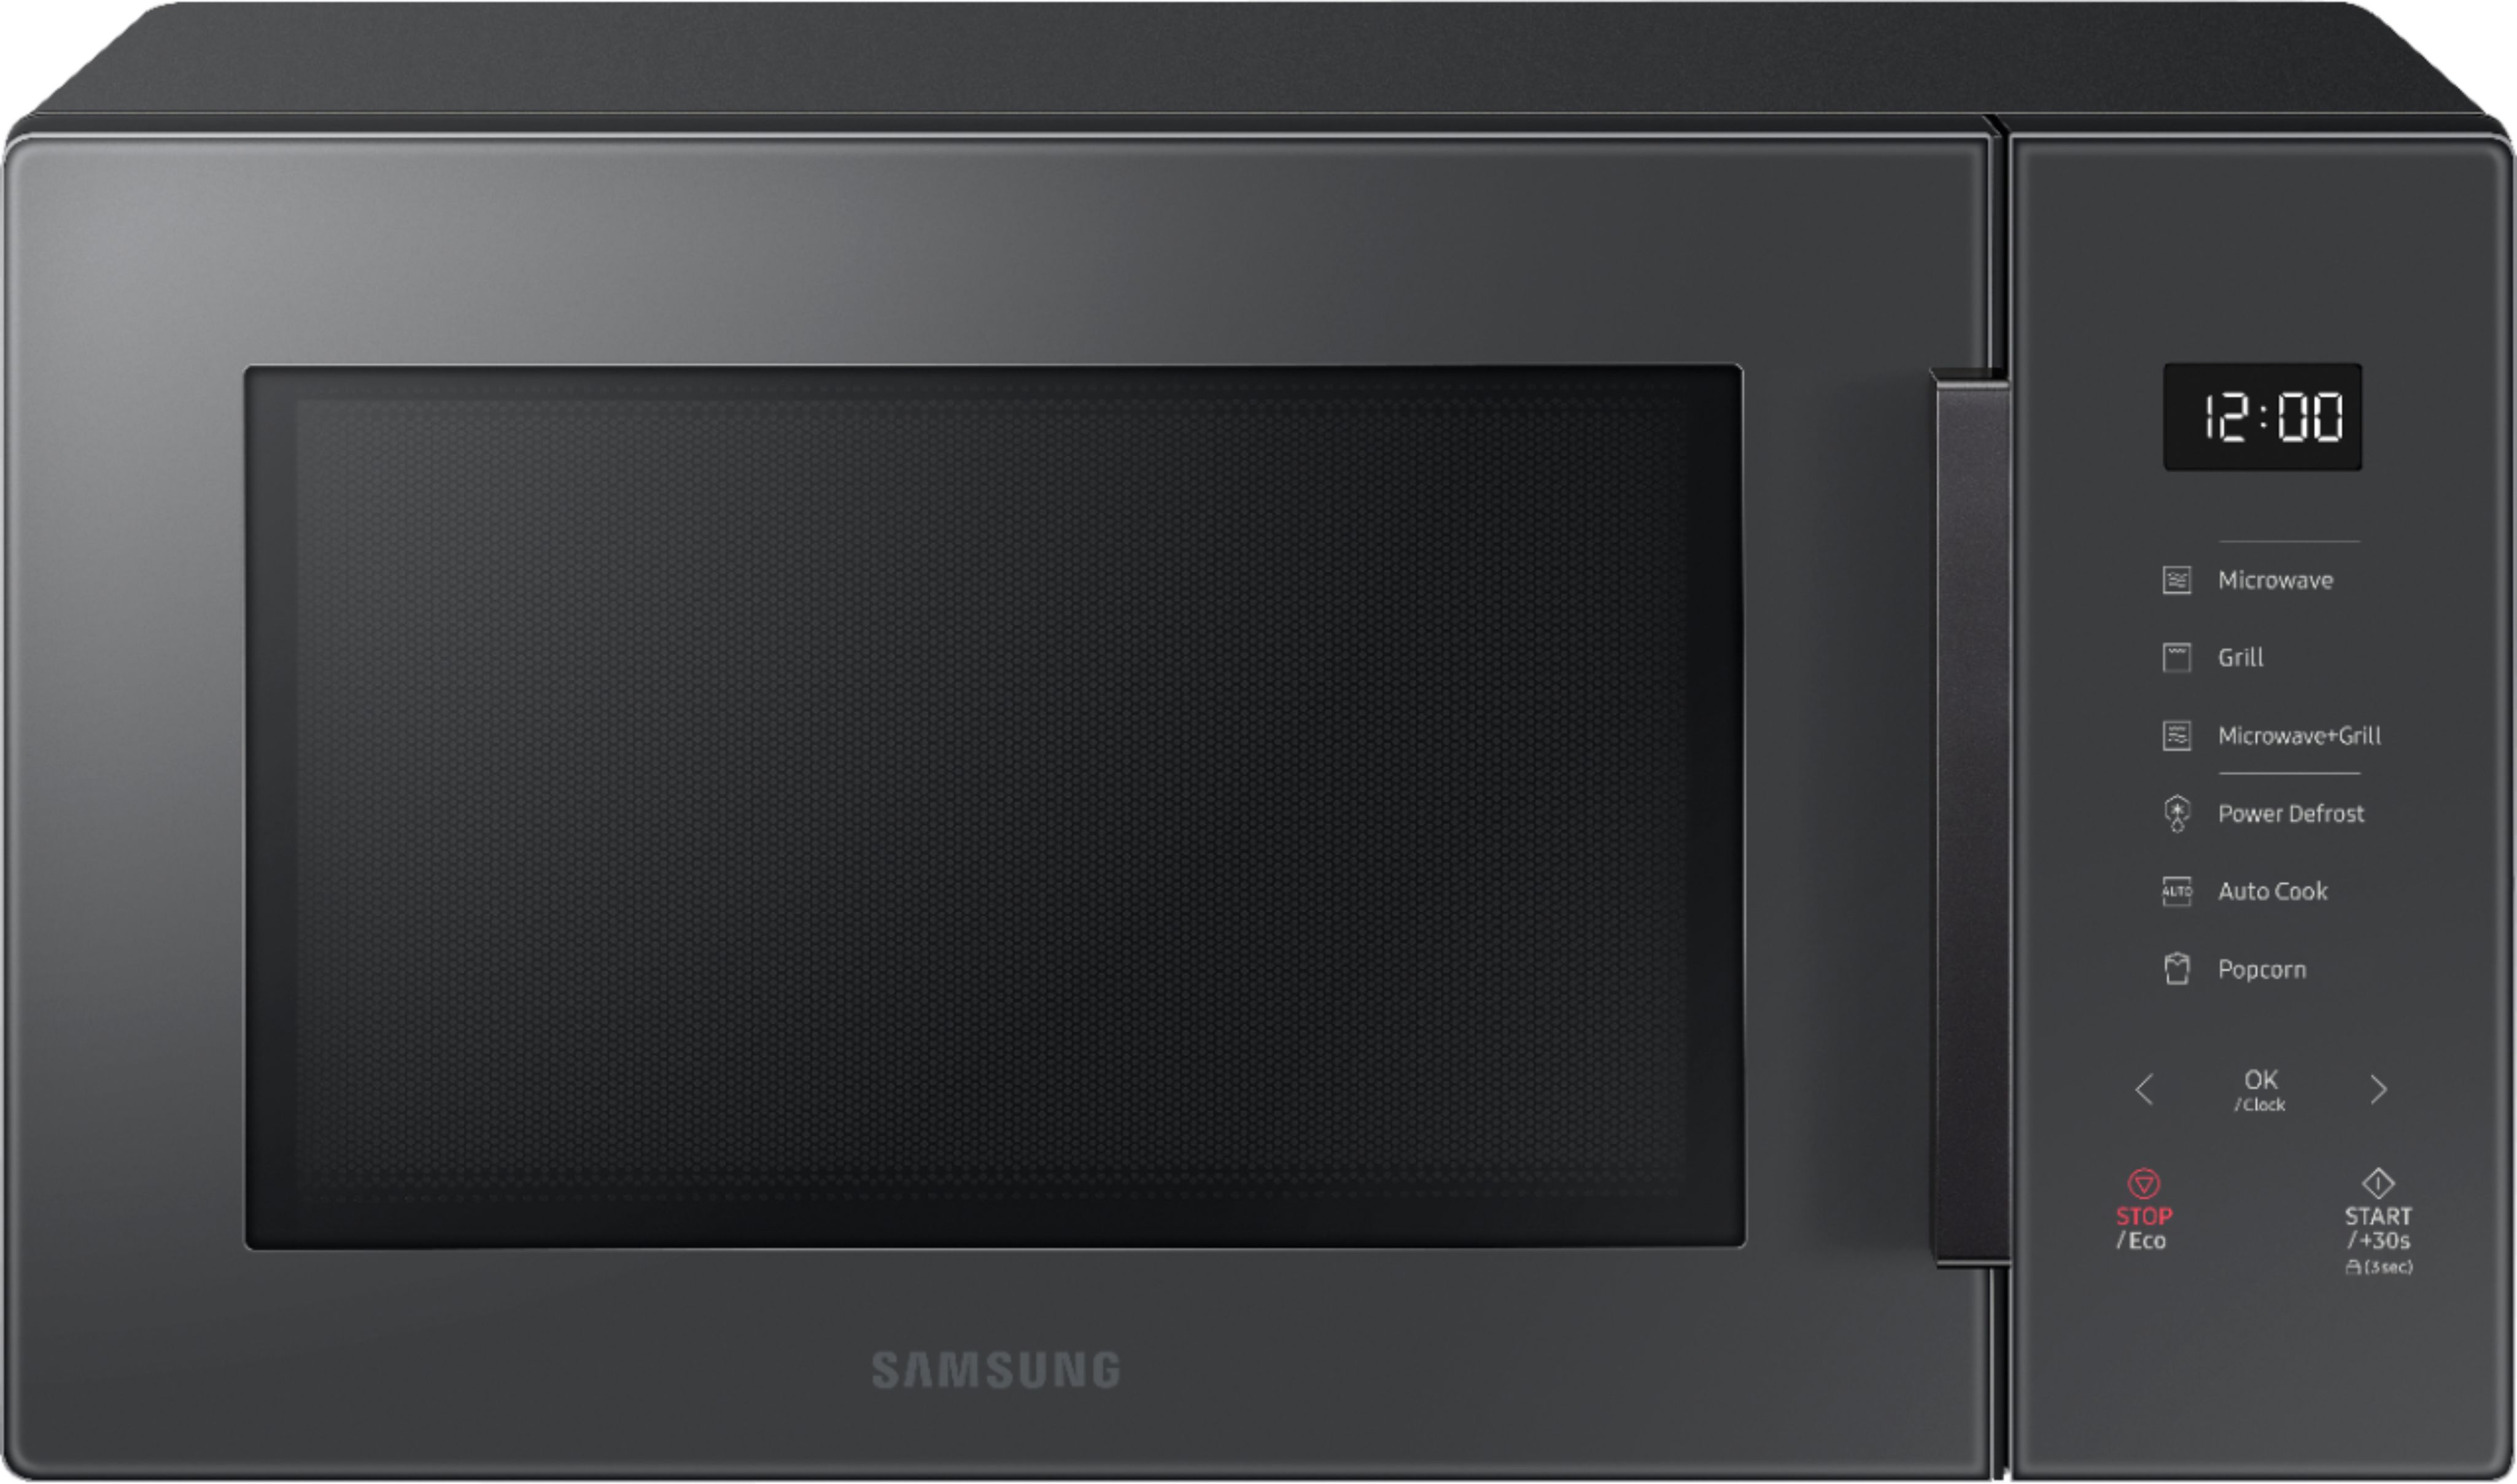 Samsung 1.1 cu. ft. Countertop Microwave with Grilling  - Best Buy